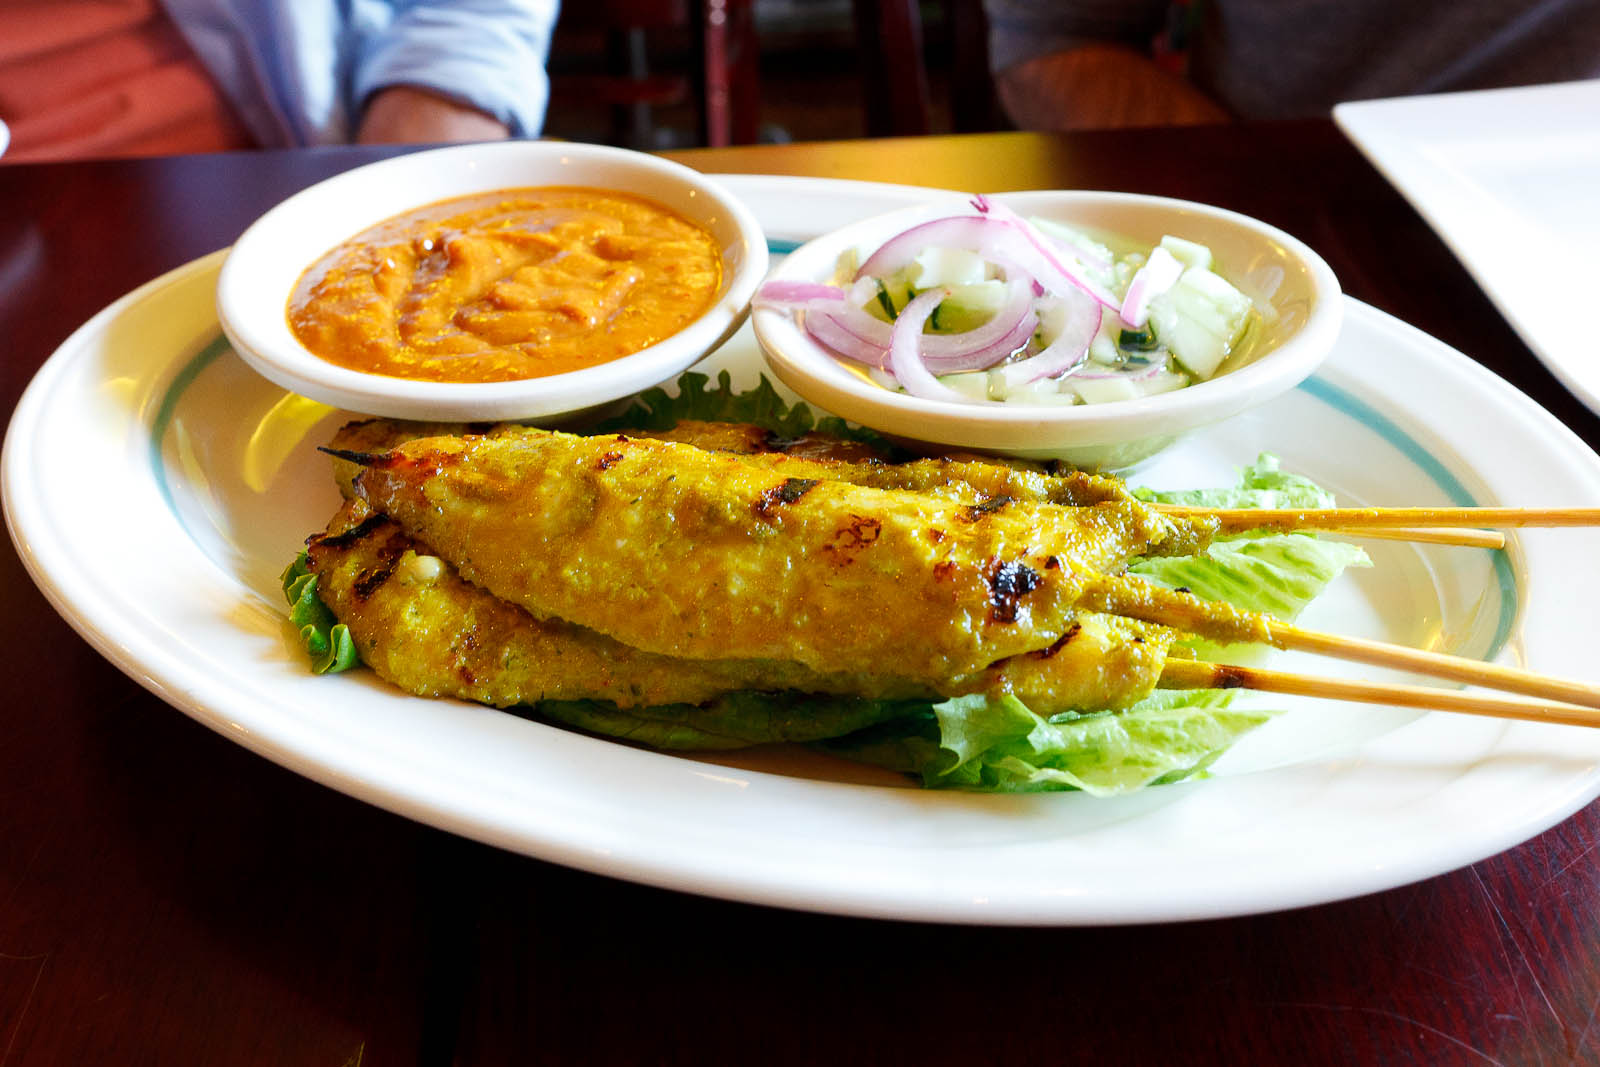 Satay chicken with peanut and cucumber sauce ($7)